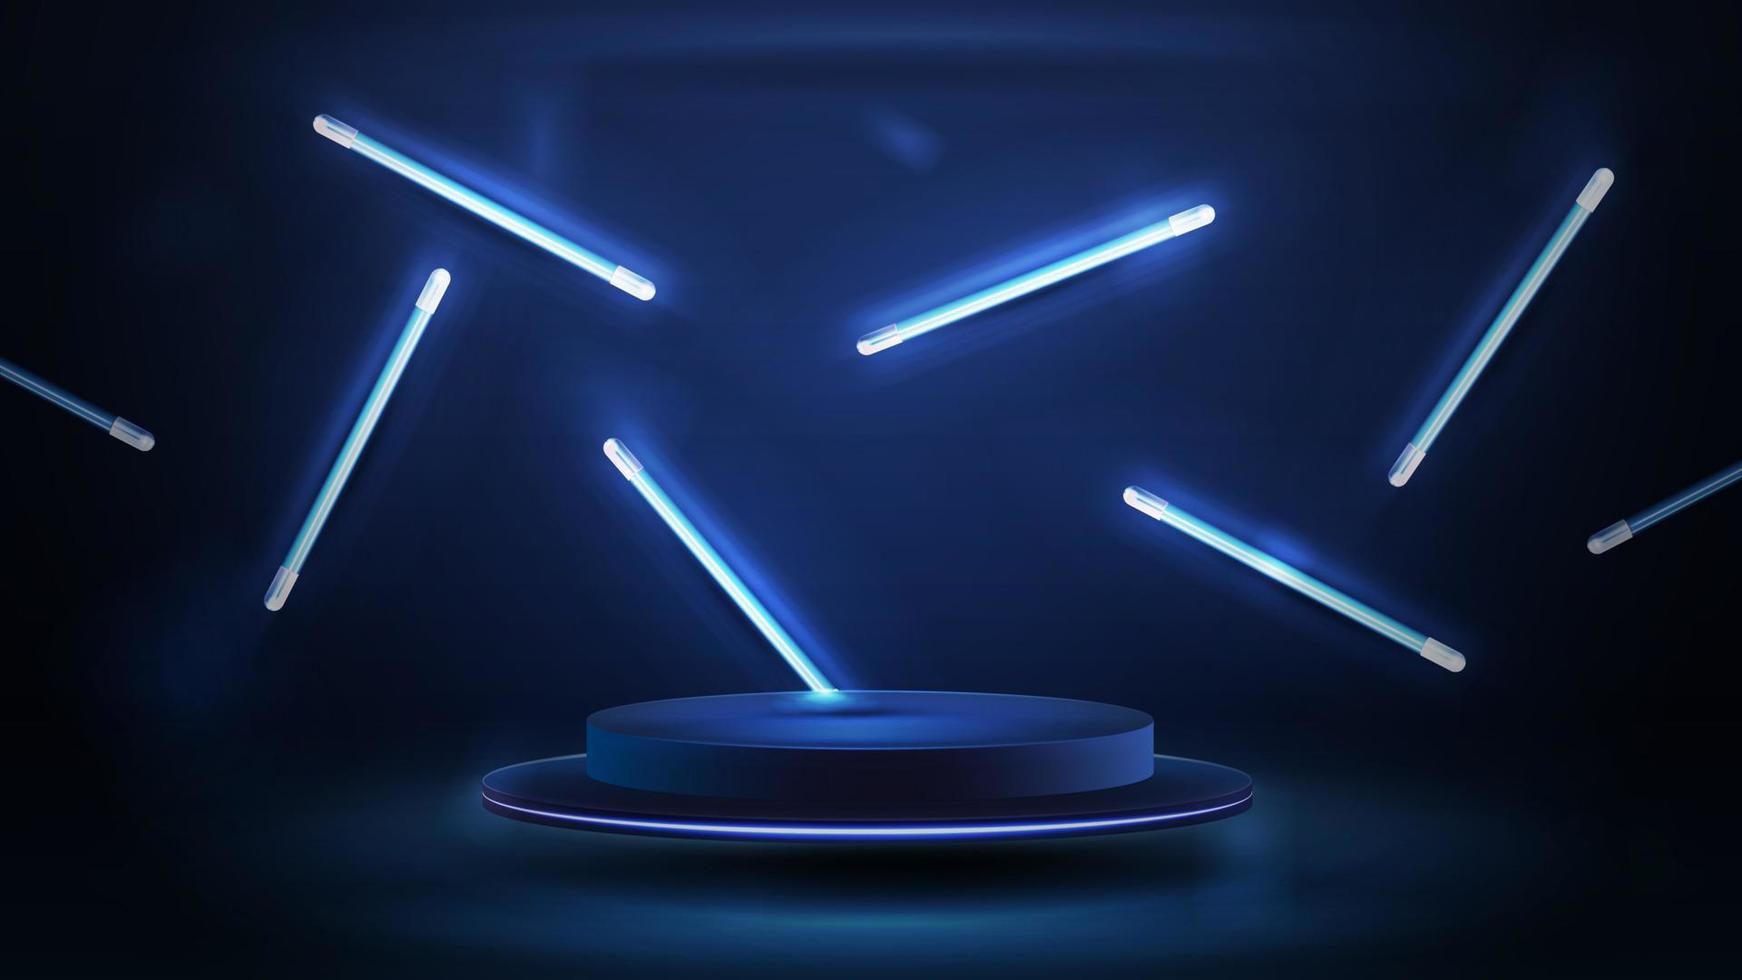 Round dark podium for product presentation with line random flying lamps around, 3d realistic vector illustration. Blue and dark digital scene